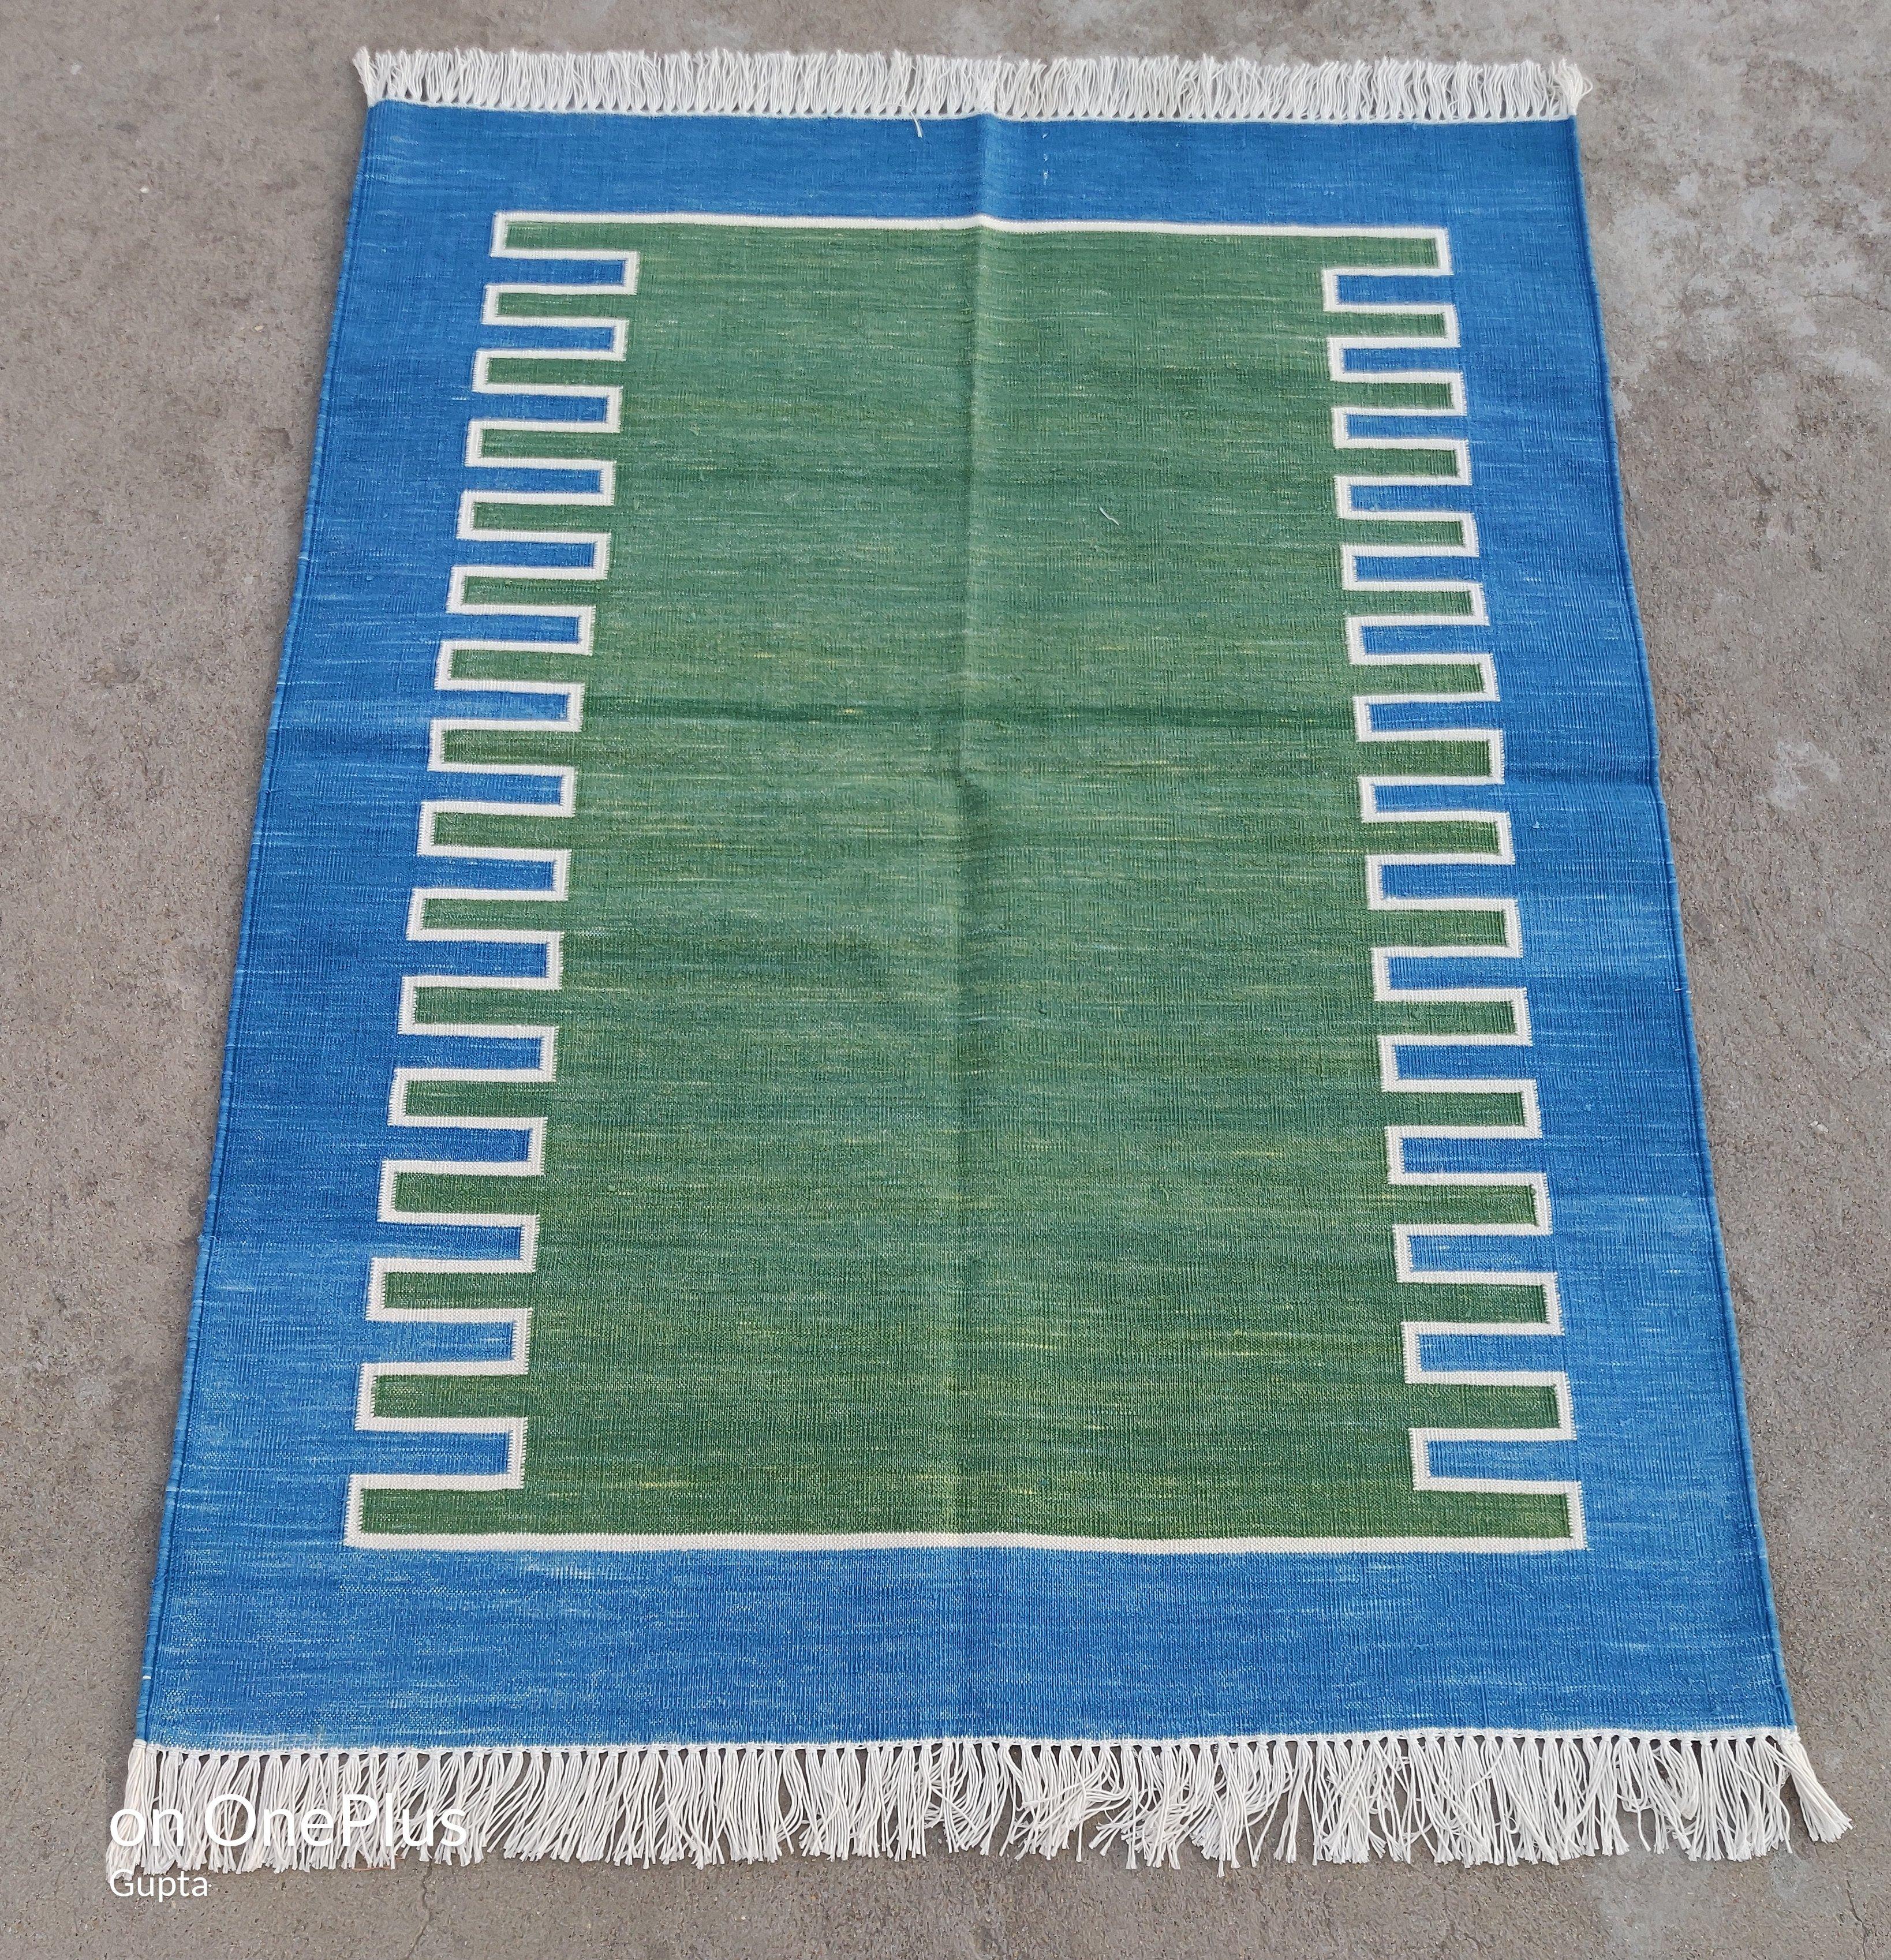 Hand-Woven Handmade Cotton Area Flat Weave Rug, 3x5 Green And Blue Striped Indian Dhurrie For Sale